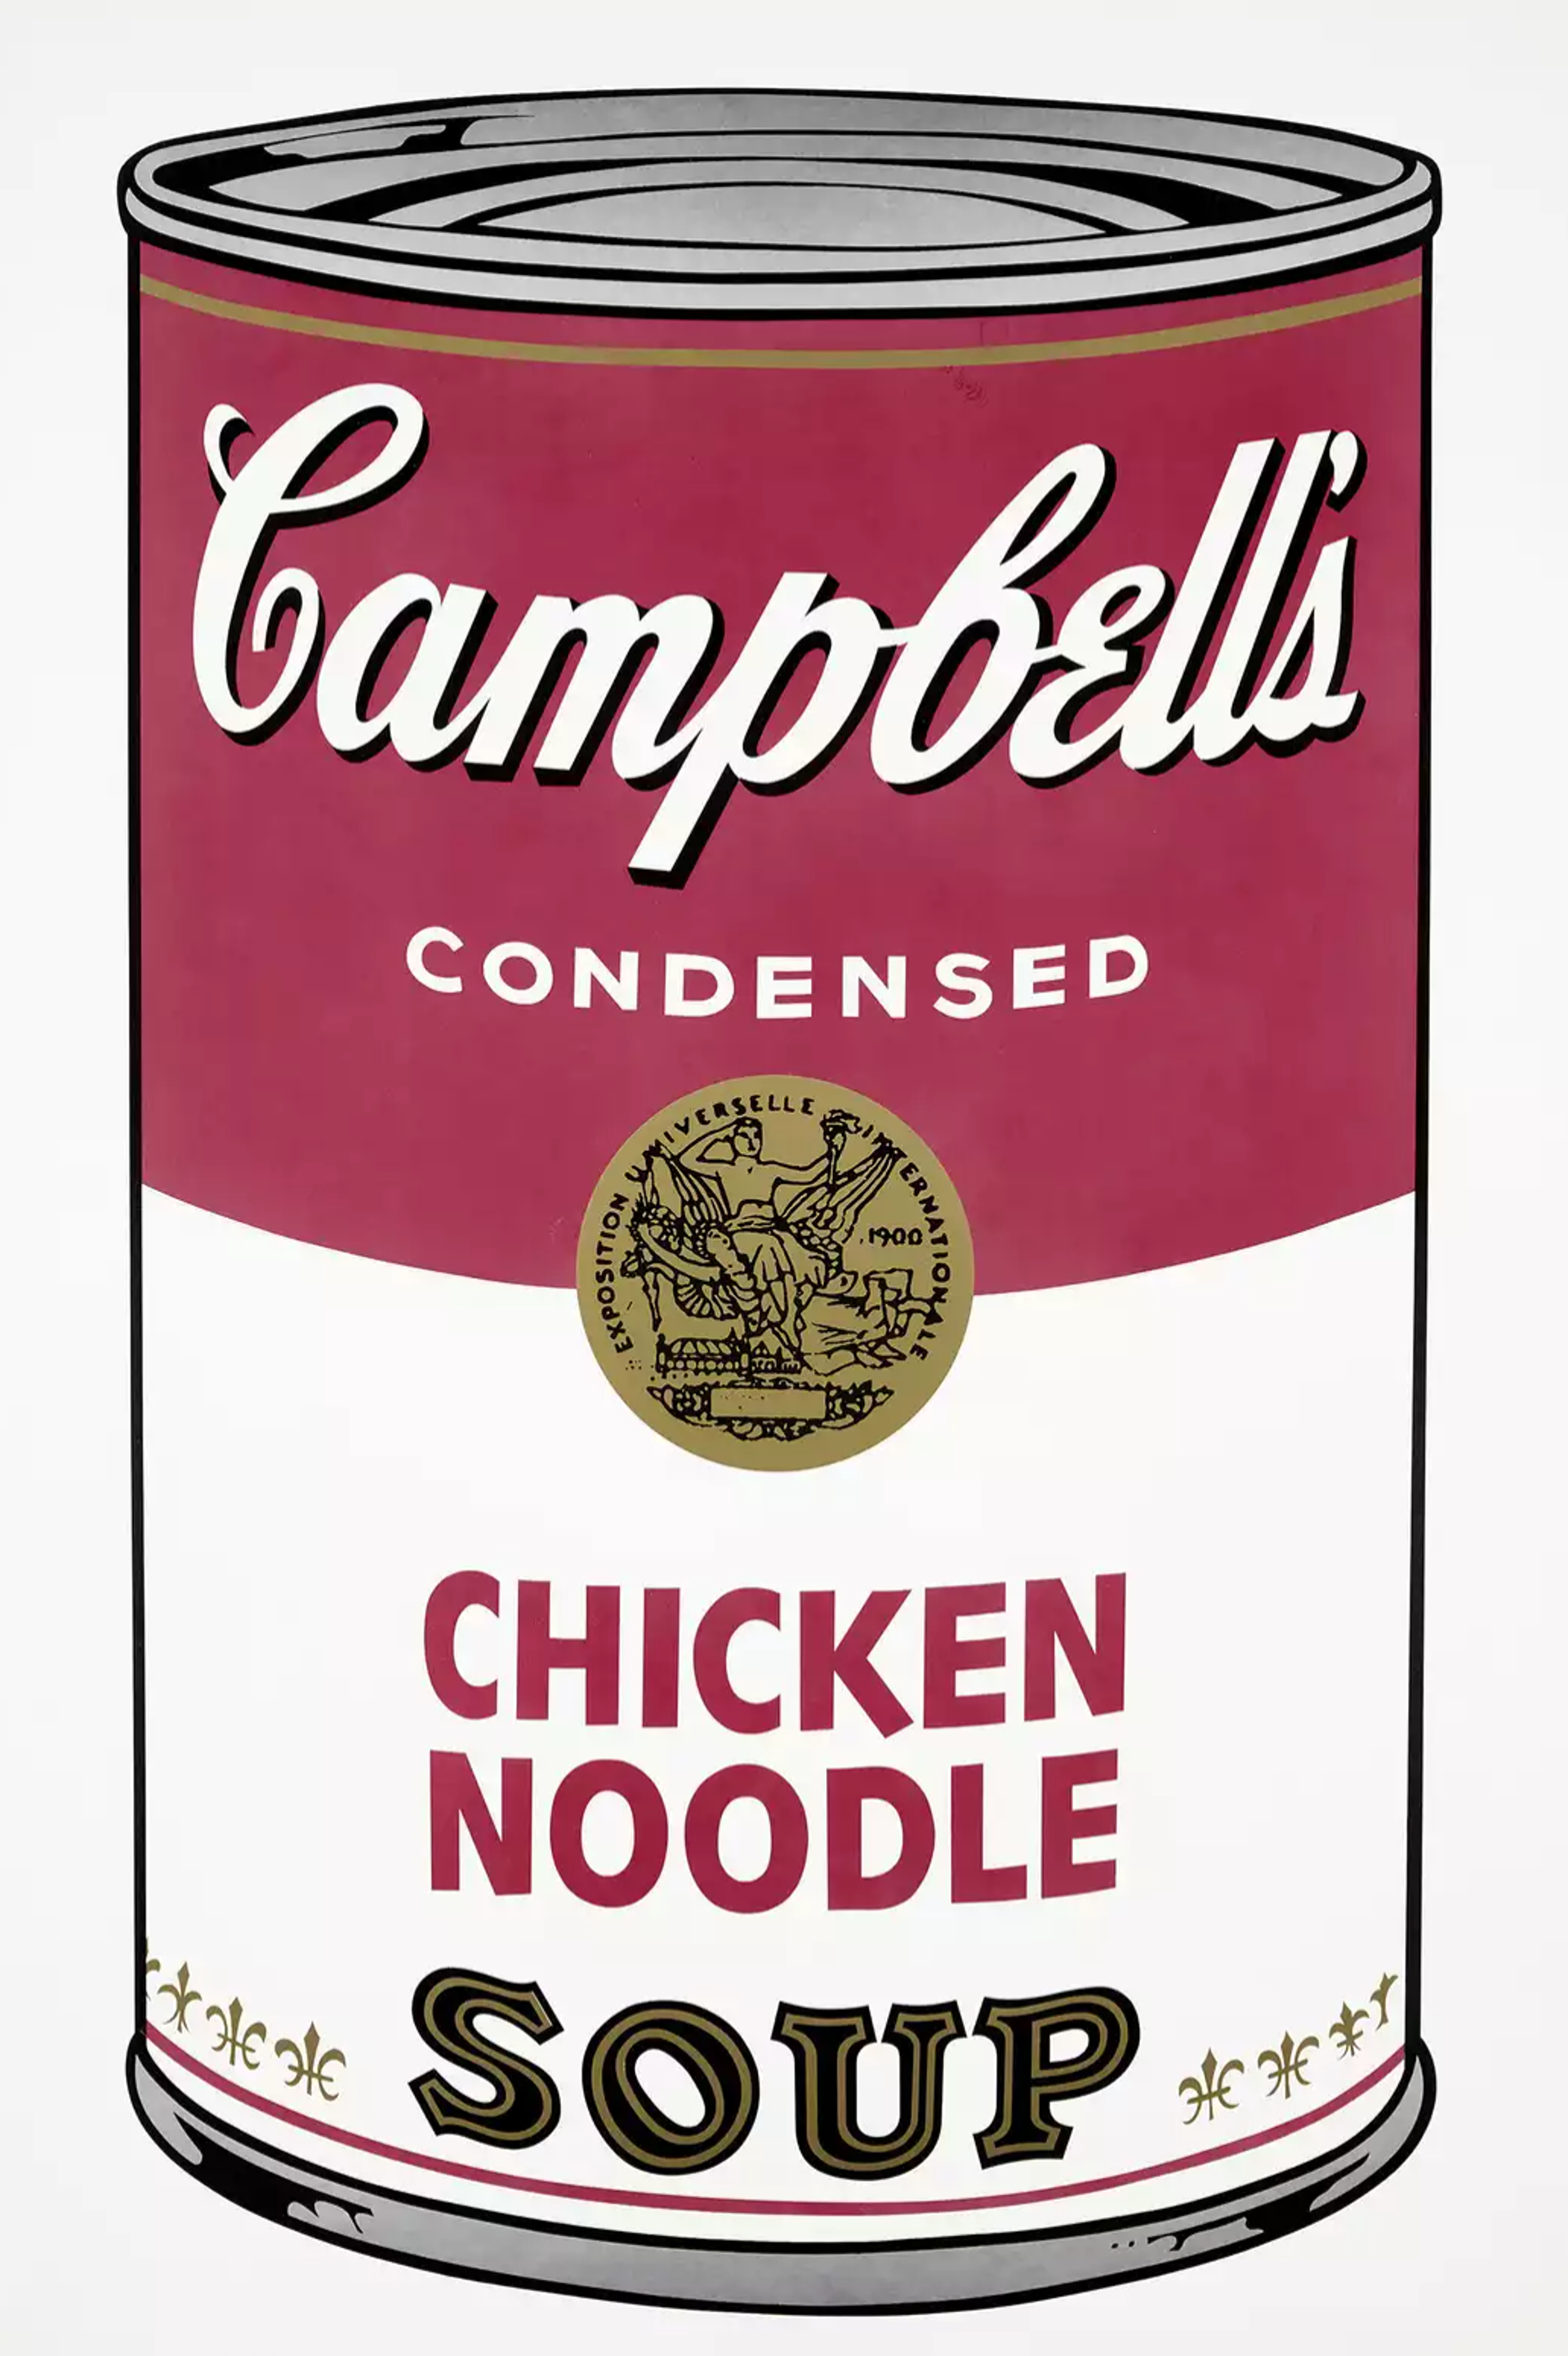 Chicken Noodle Soup by Andy Warhol